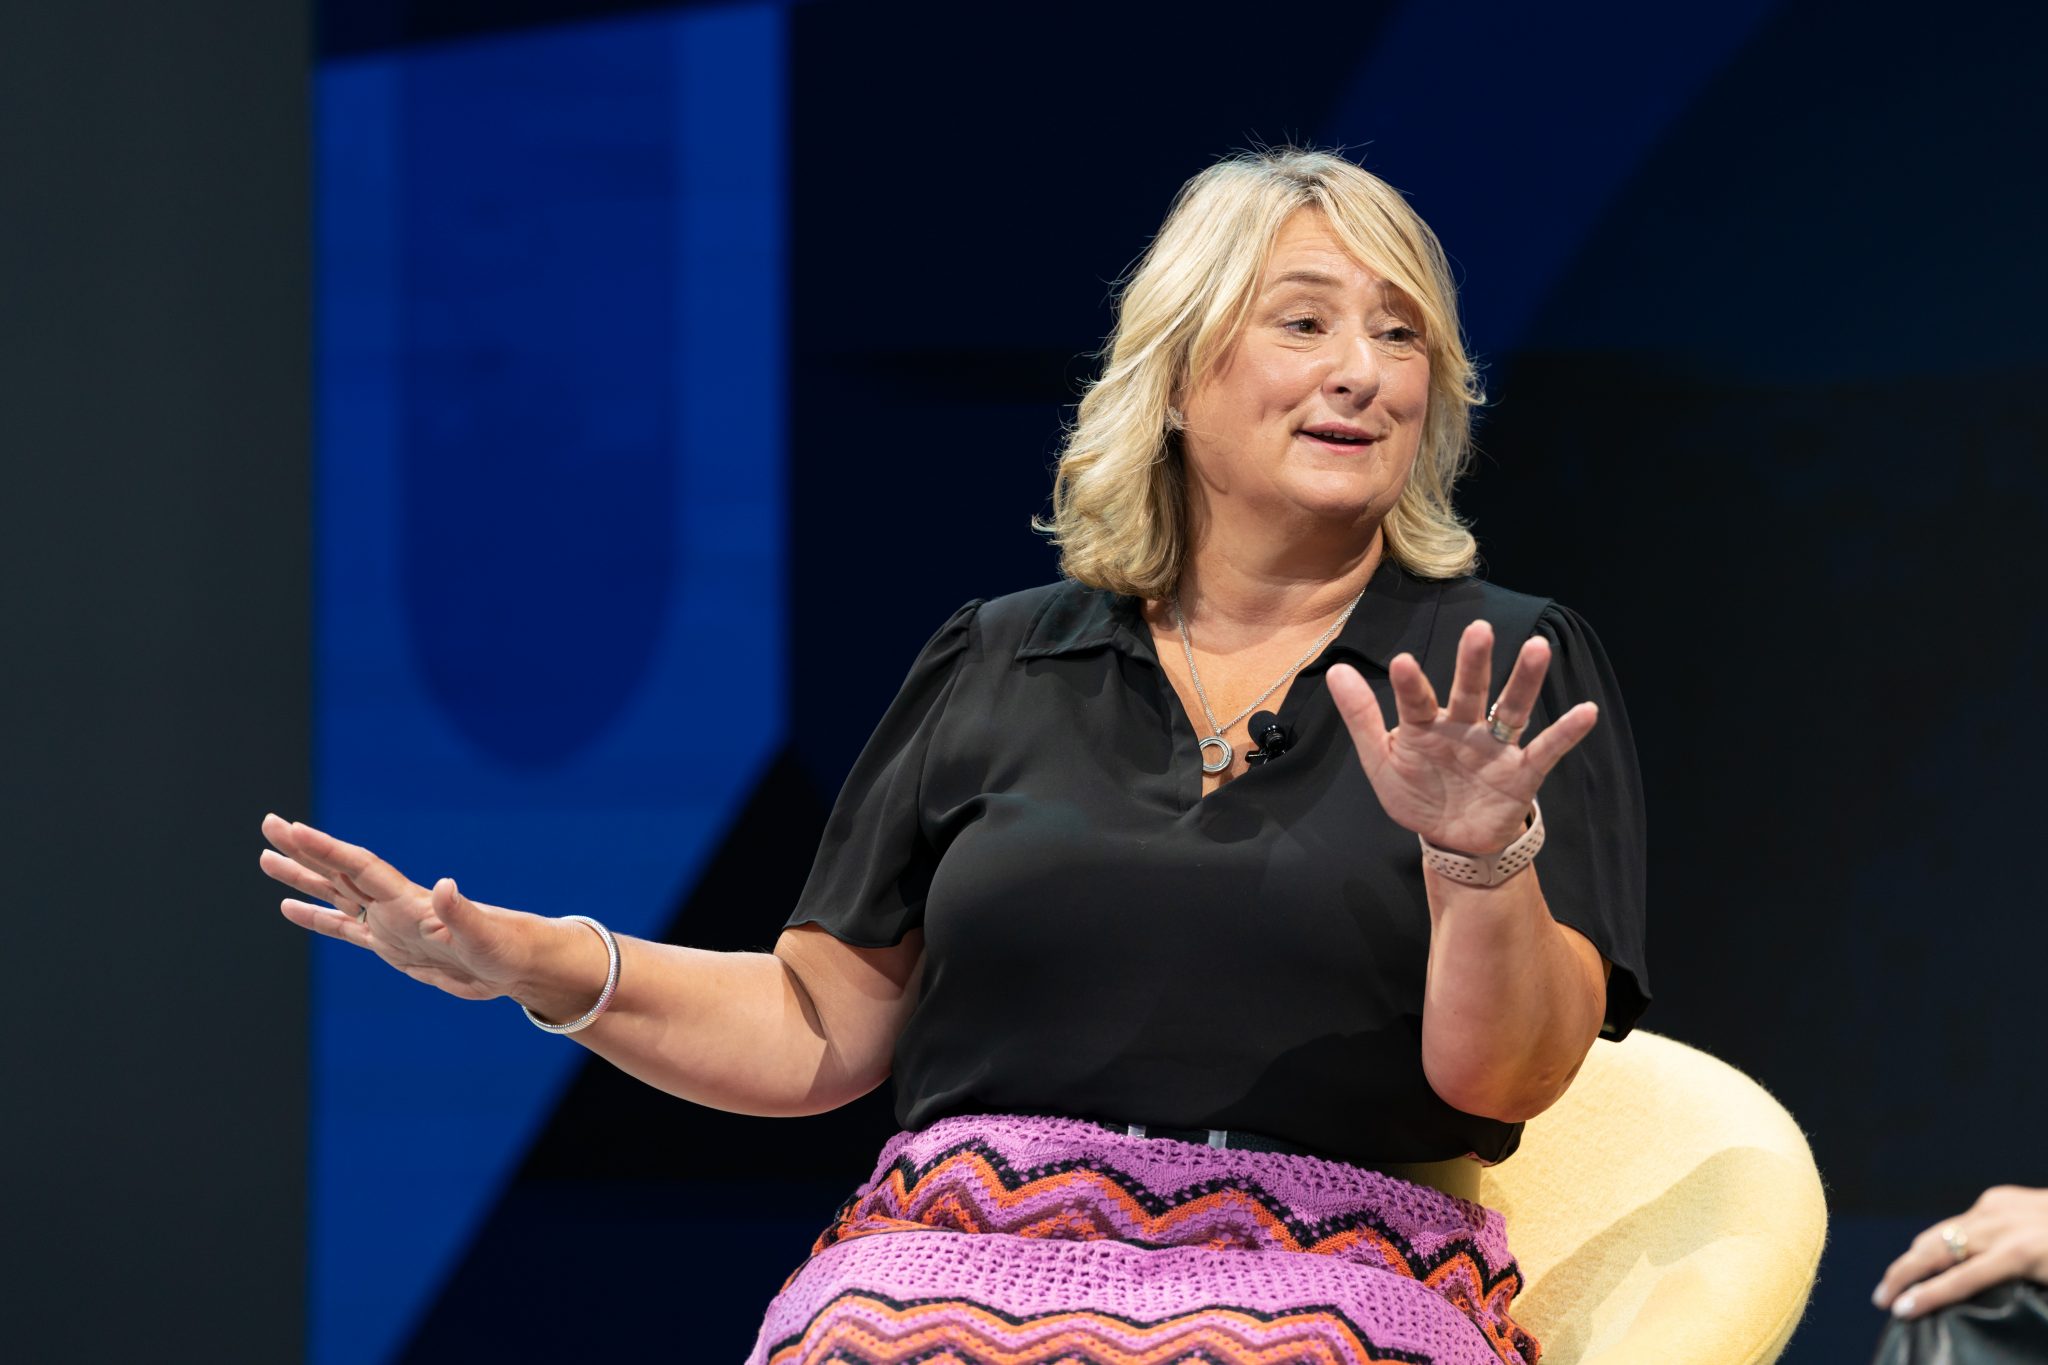 Audrey Hendley, president of American Express Travel, making a point on stage during a sponsored session at Skift Global Forum in New York City on Sept. 20, 2022.